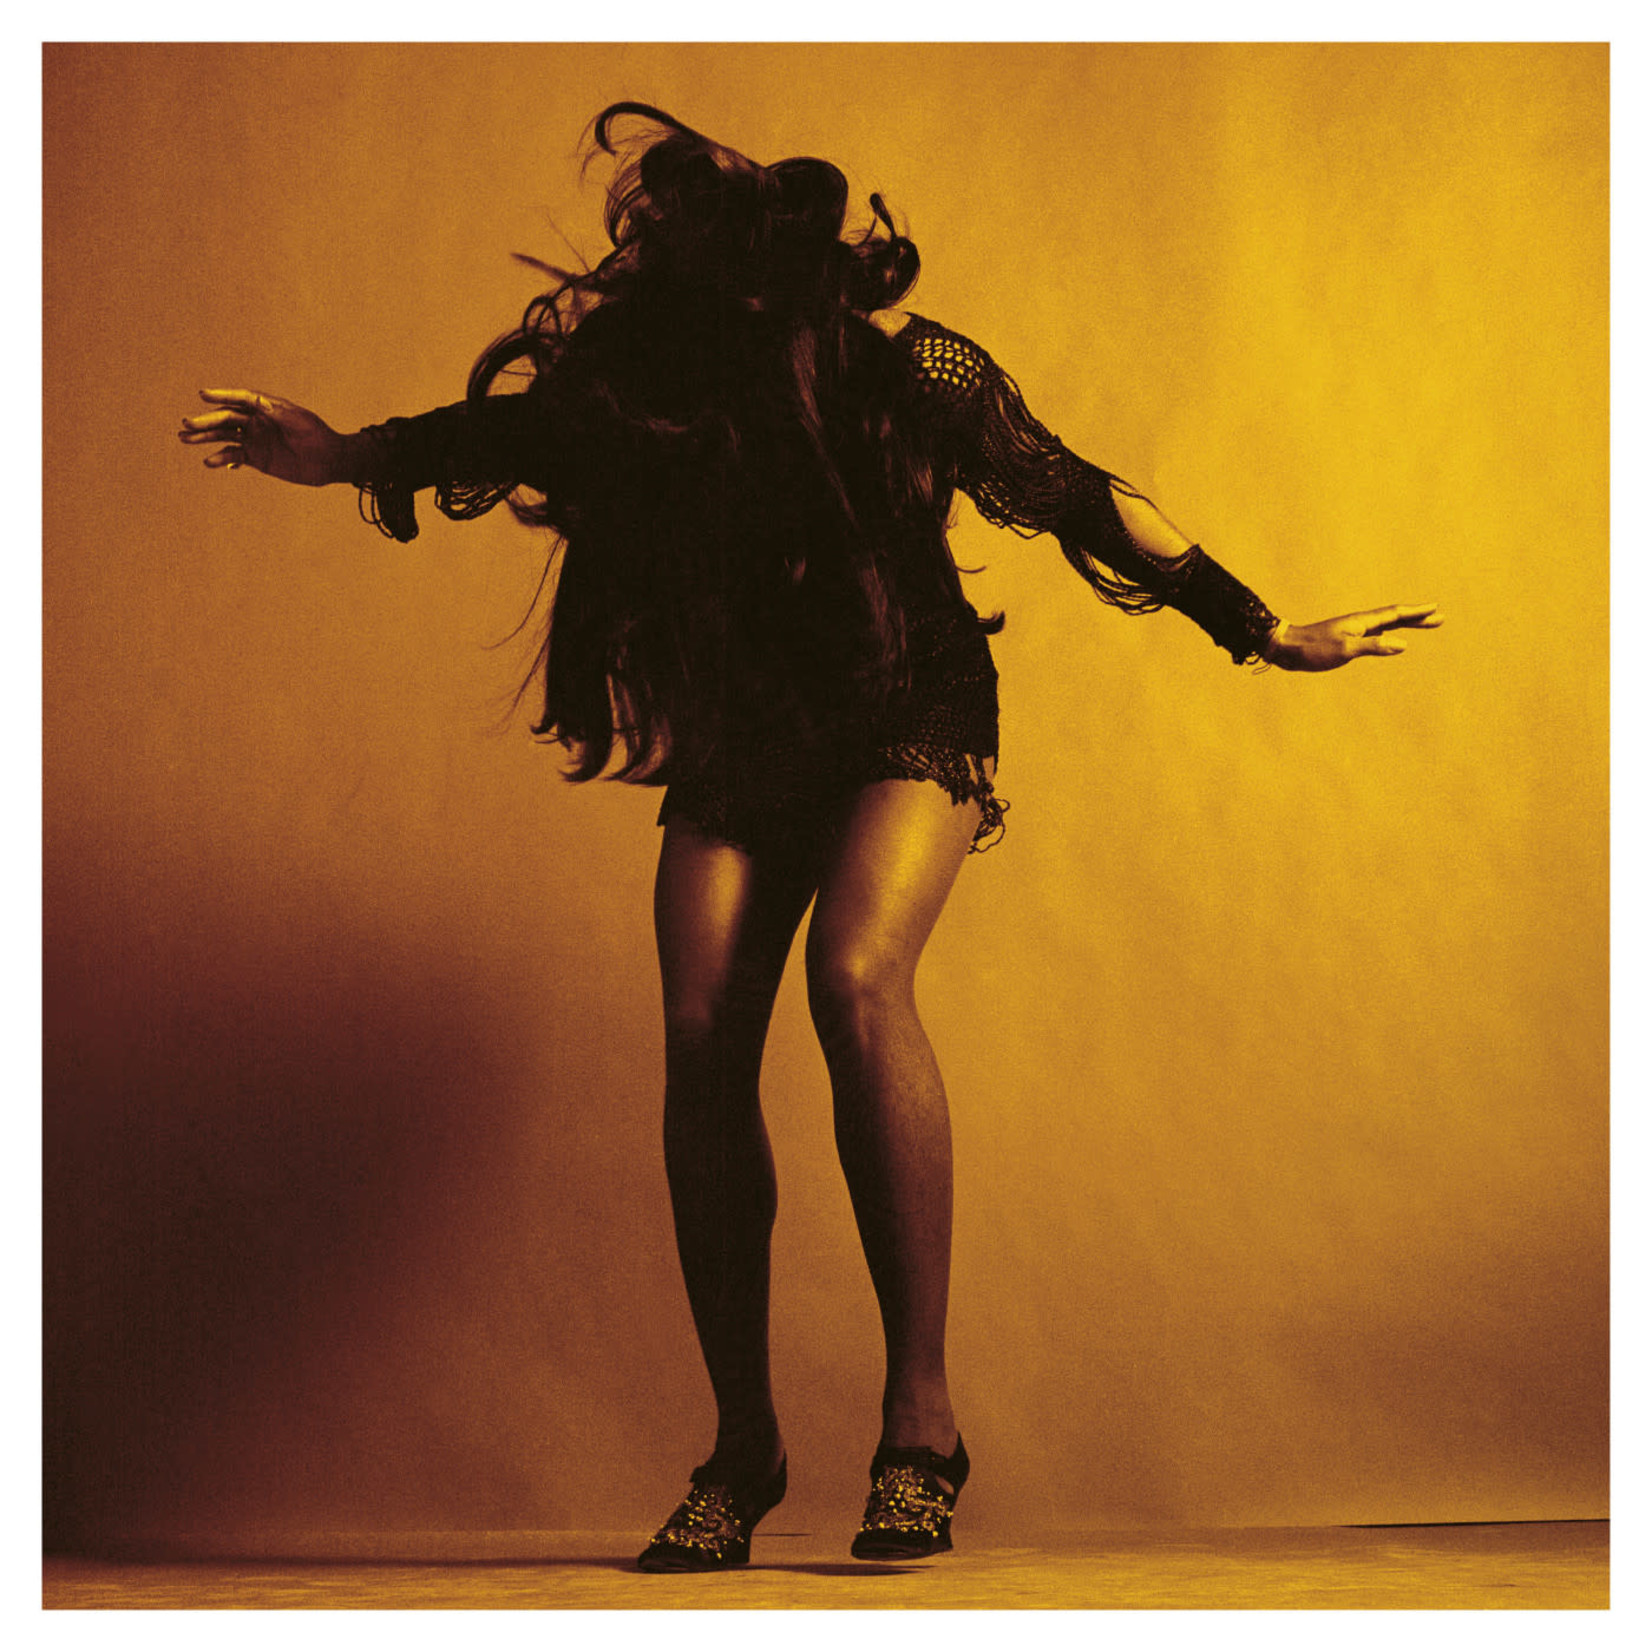 [New] The Last Shadow Puppets - Everything You've Come To Expect